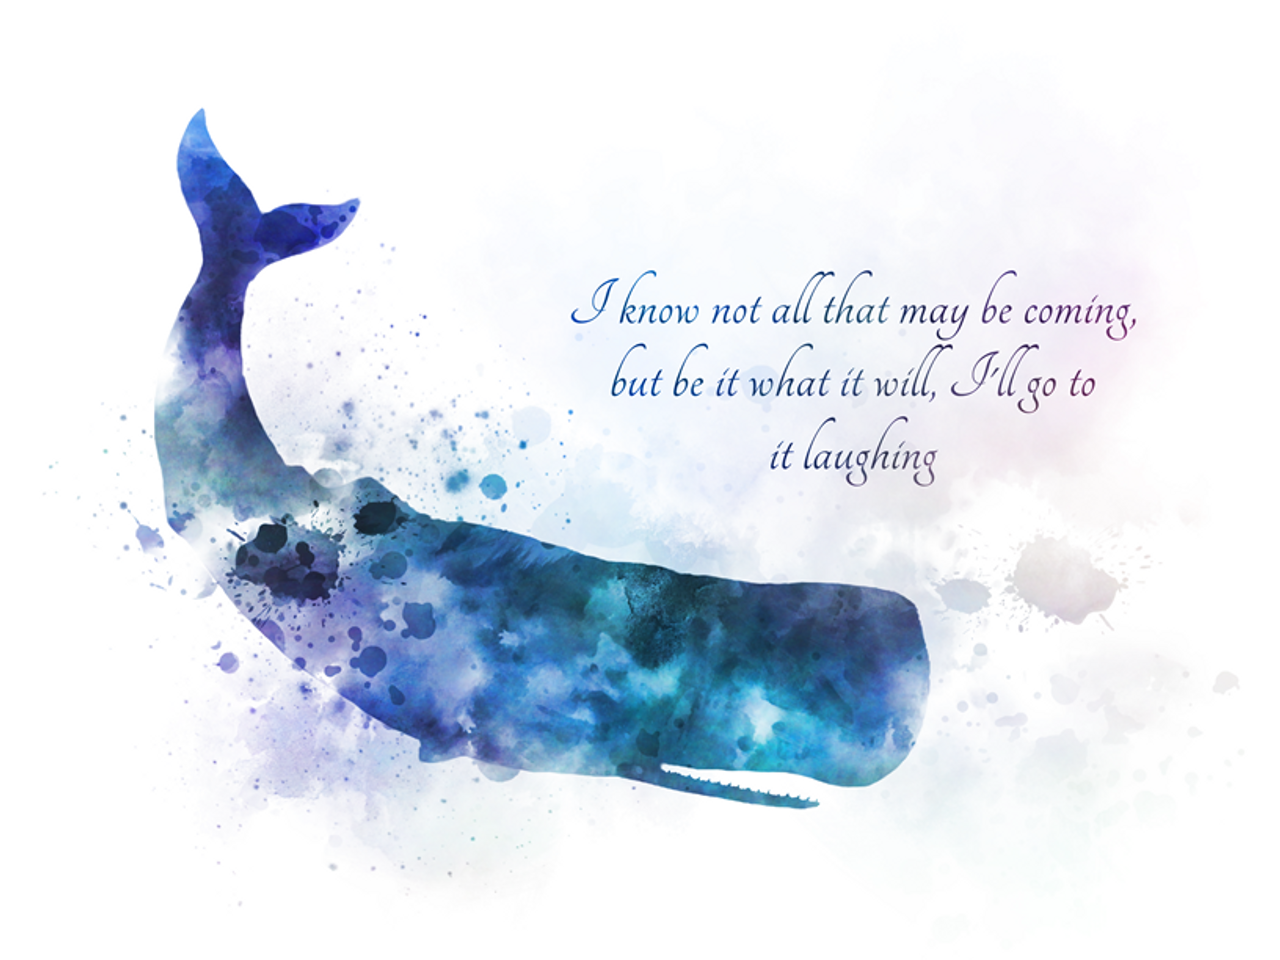 Moby Dick Quote ART PRINT Whale, Literature, Inspirational, Gift, Wall